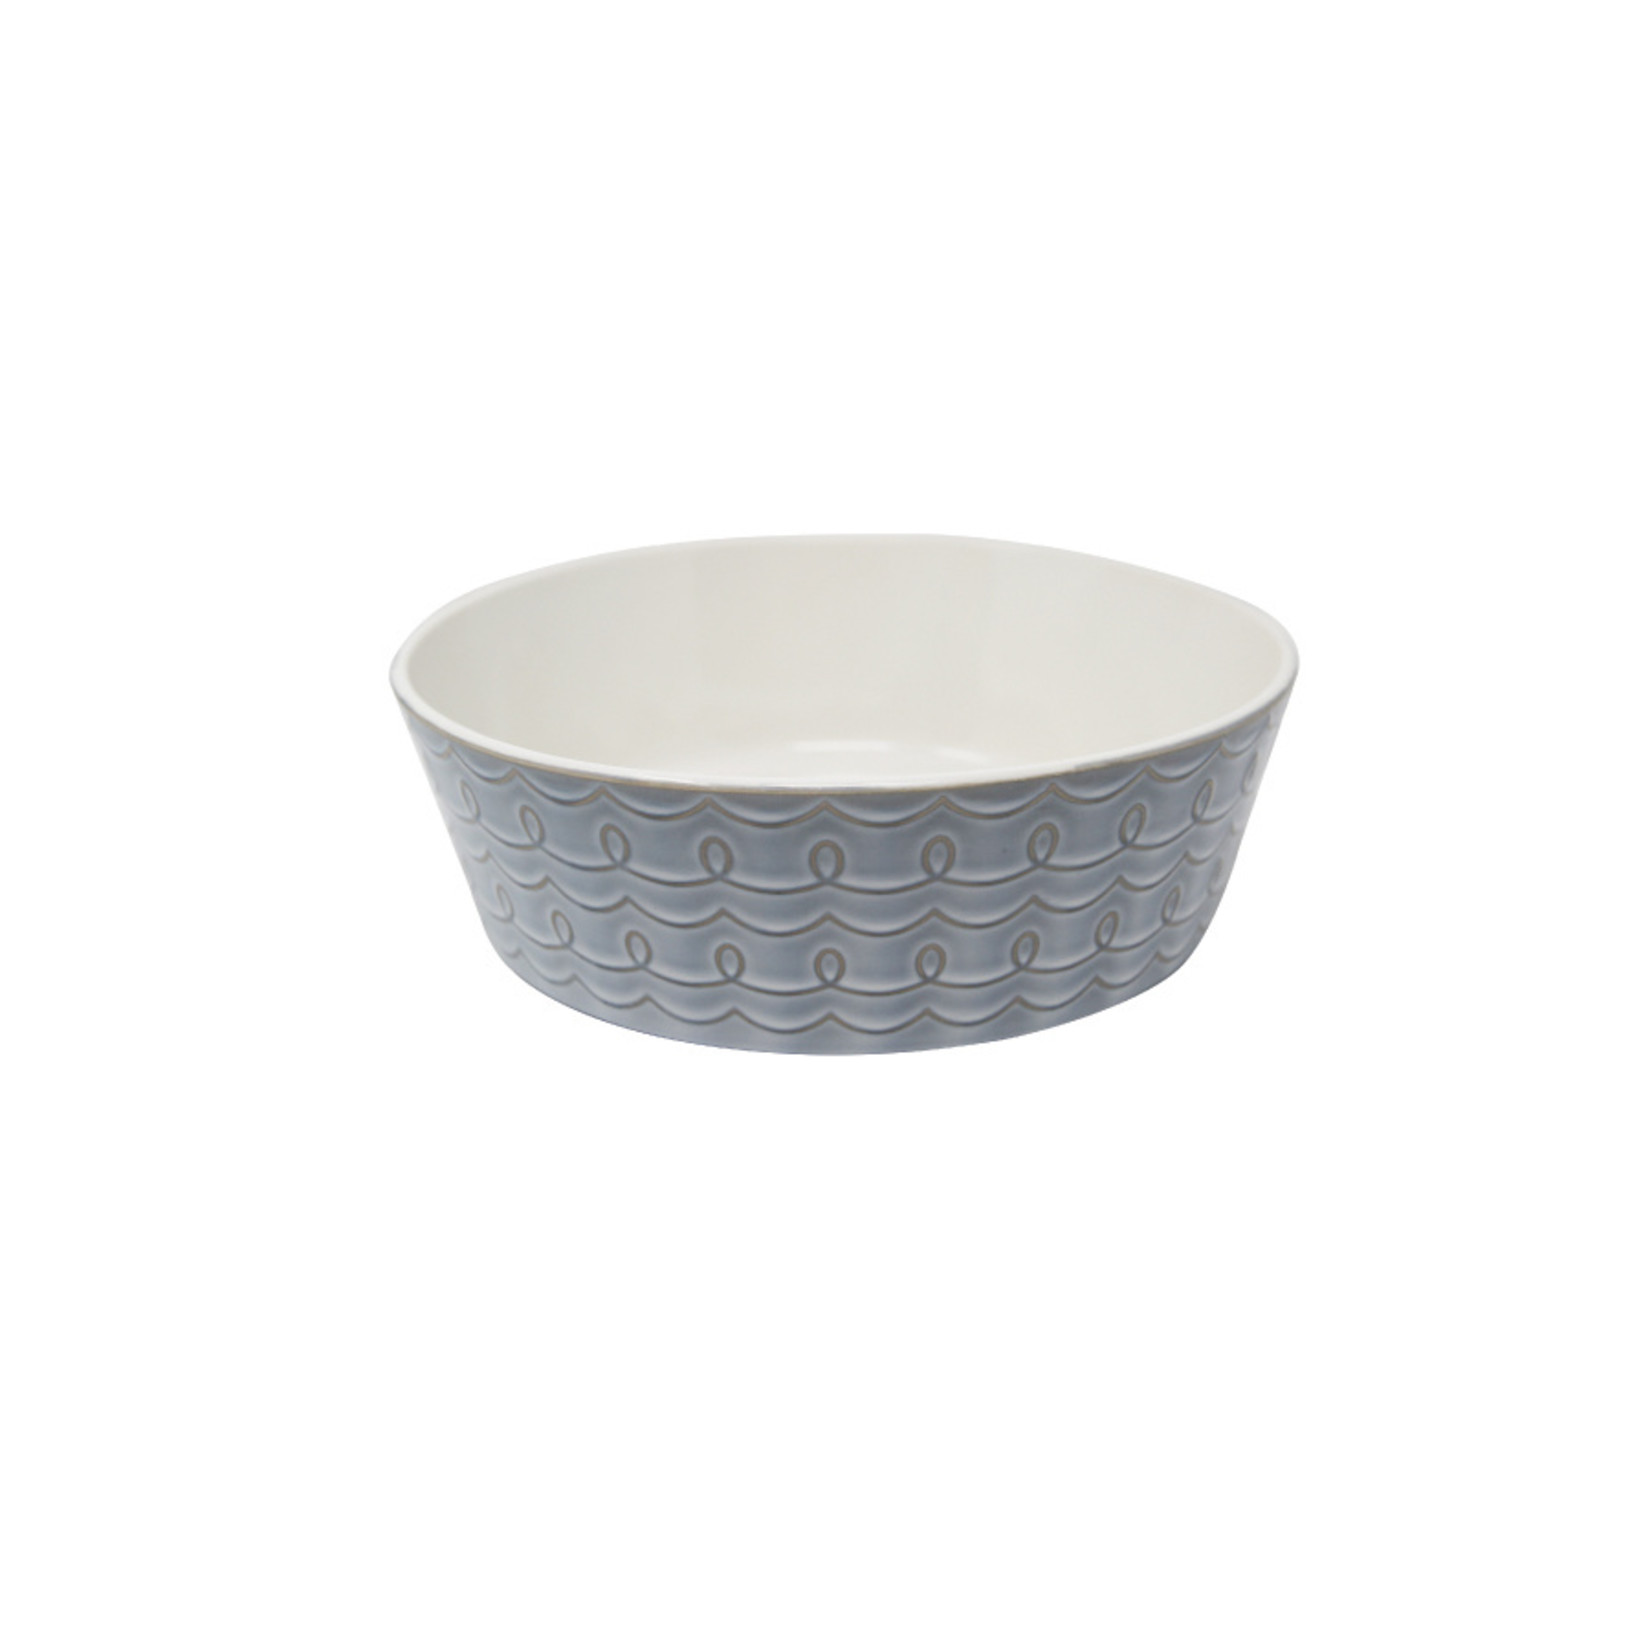 Pioneer Pet Products / Smart Cat Pioneer Pet Ceramic Bowls and Dishes for Dogs and Cats